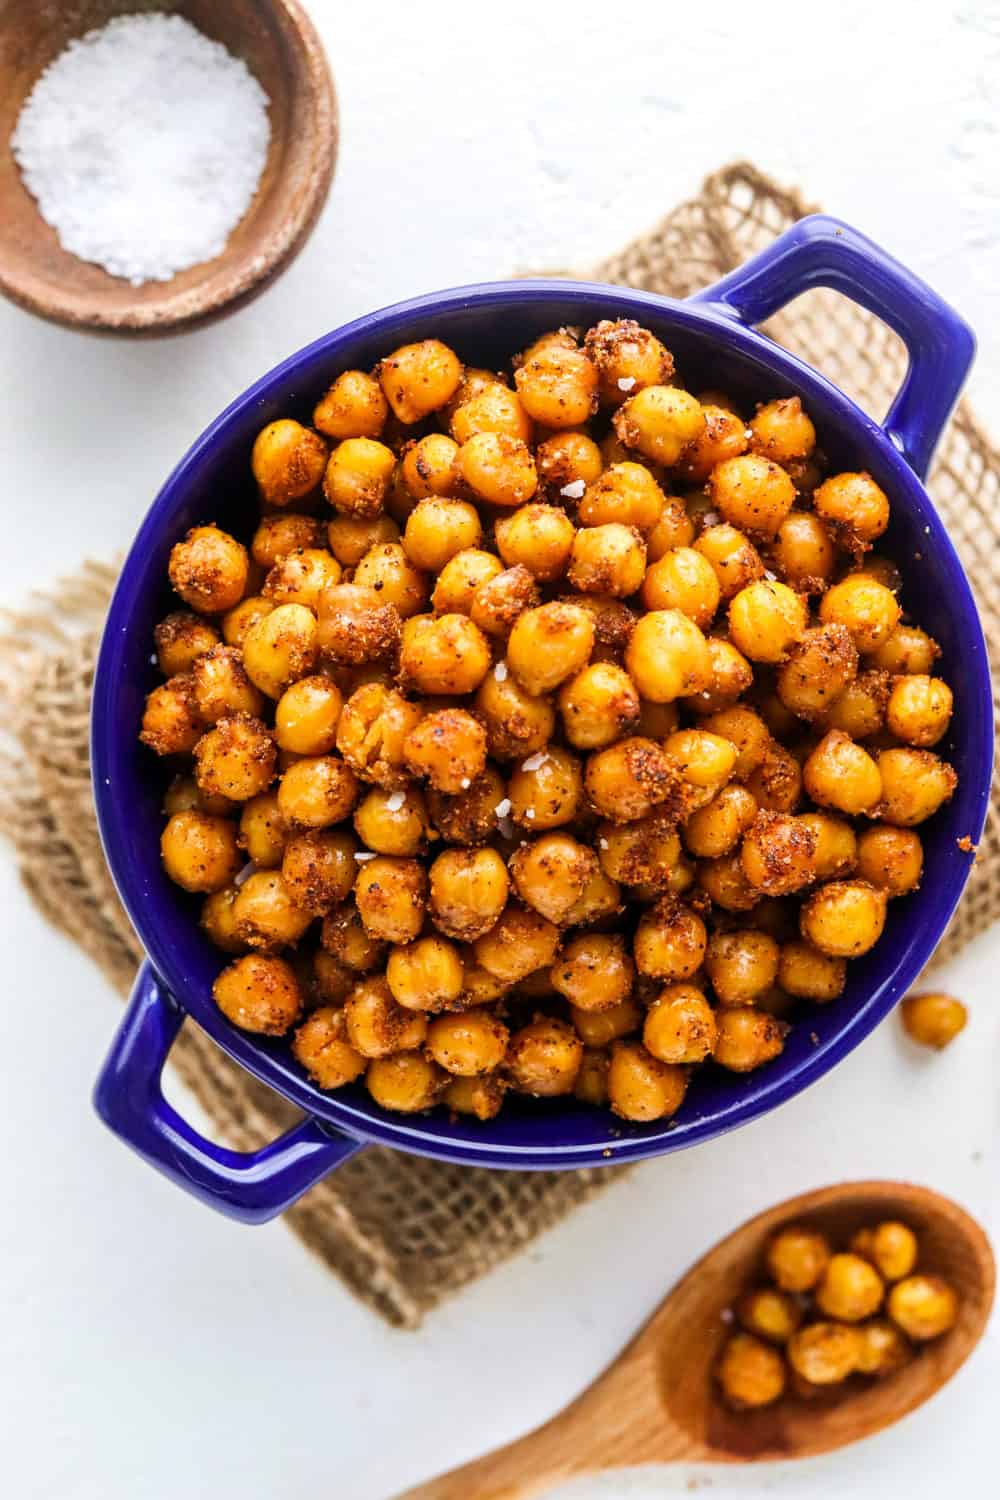 Small blue pot filled with crispy roasted chickpeas